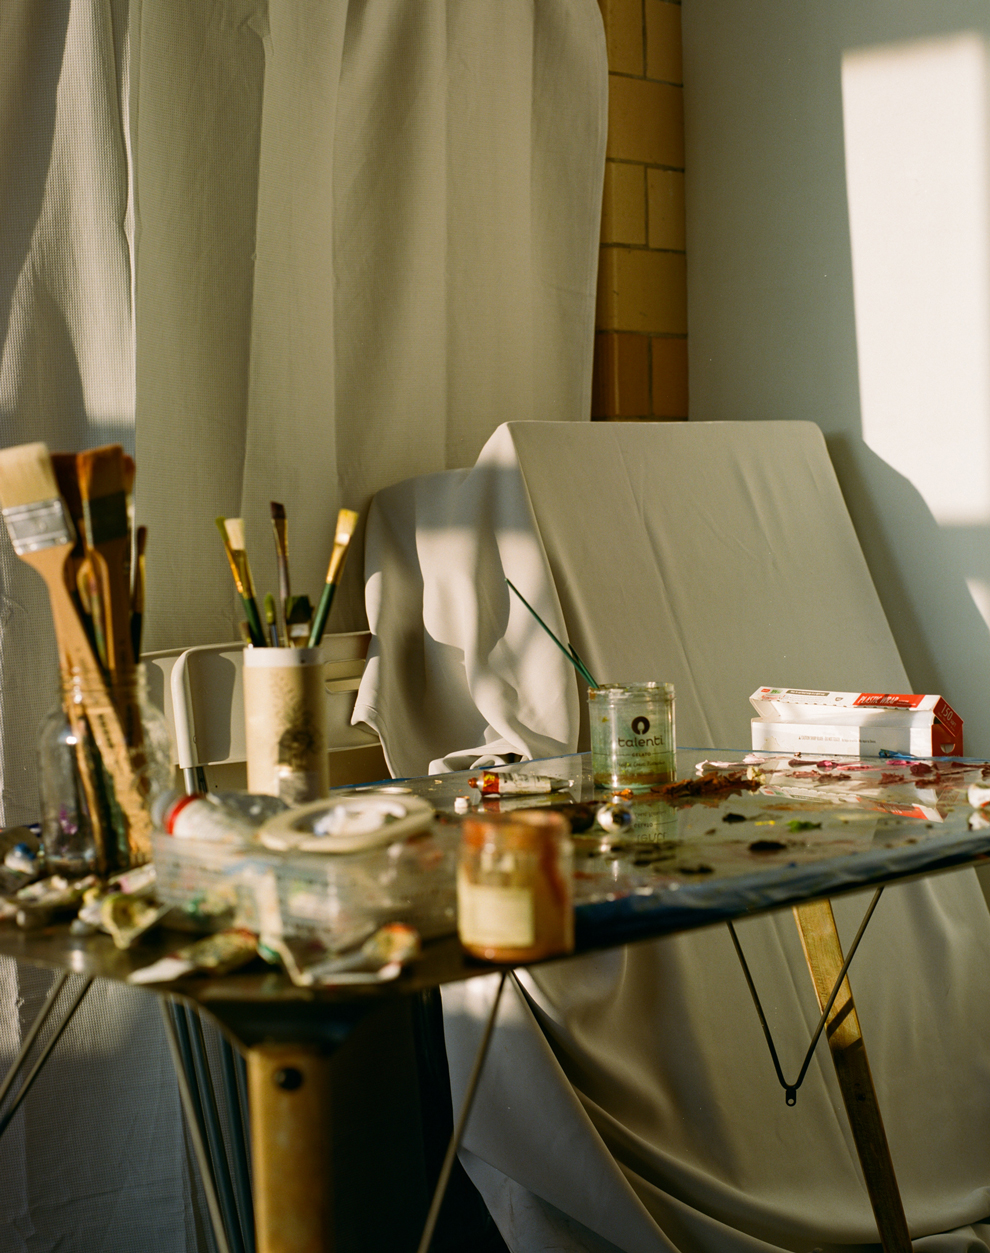 Photo of Lila Thomas's studio showing a variety of paints and other painting supplies on a table